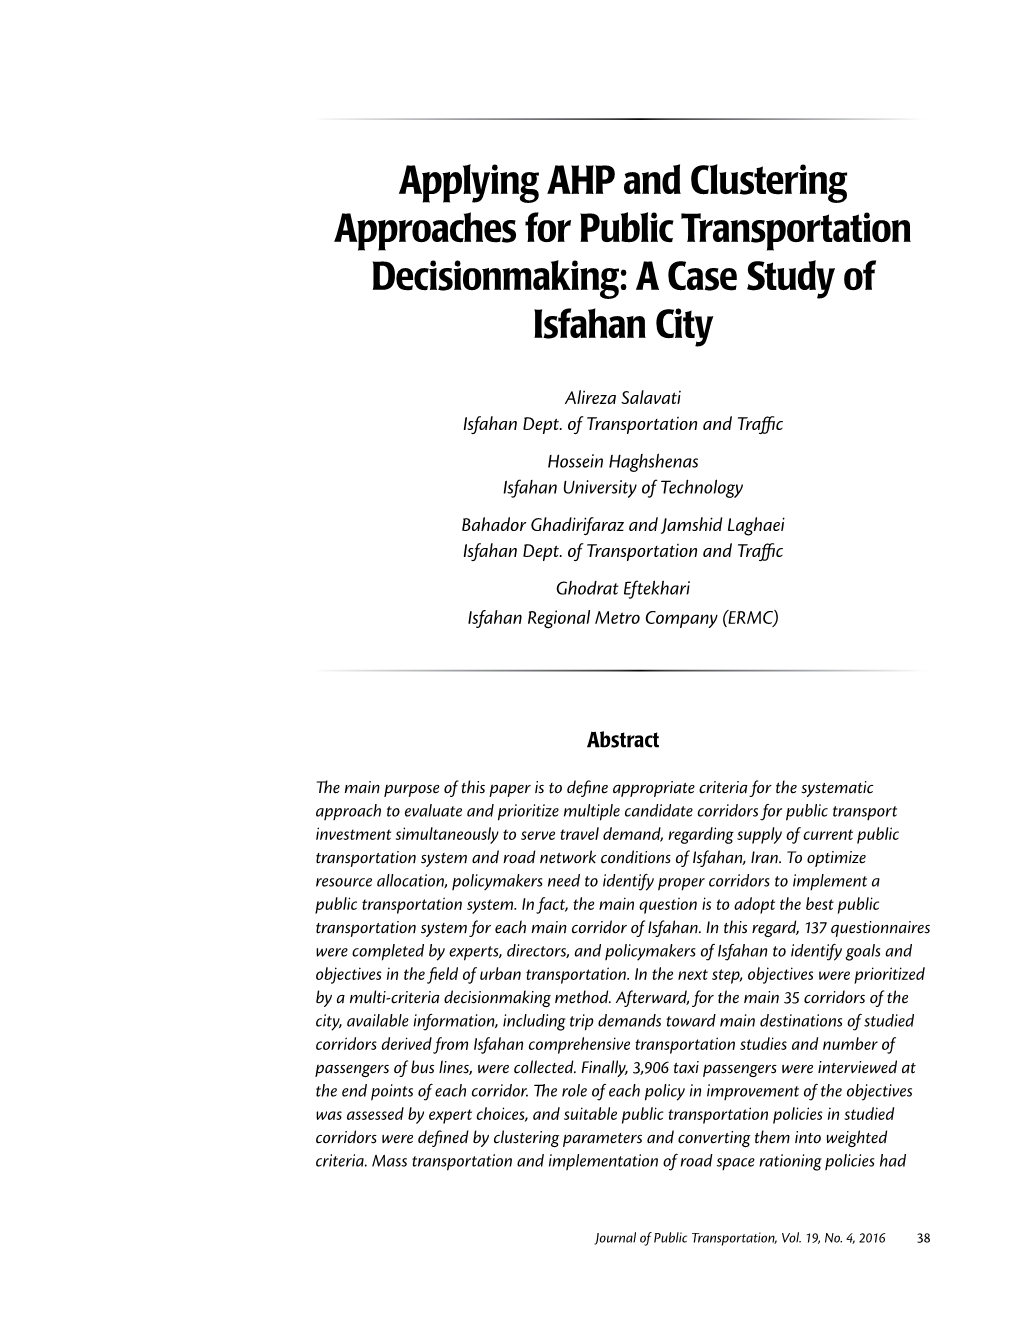 Applying AHP and Clustering Approaches for Public Transportation Decisionmaking: a Case Study of Isfahan City